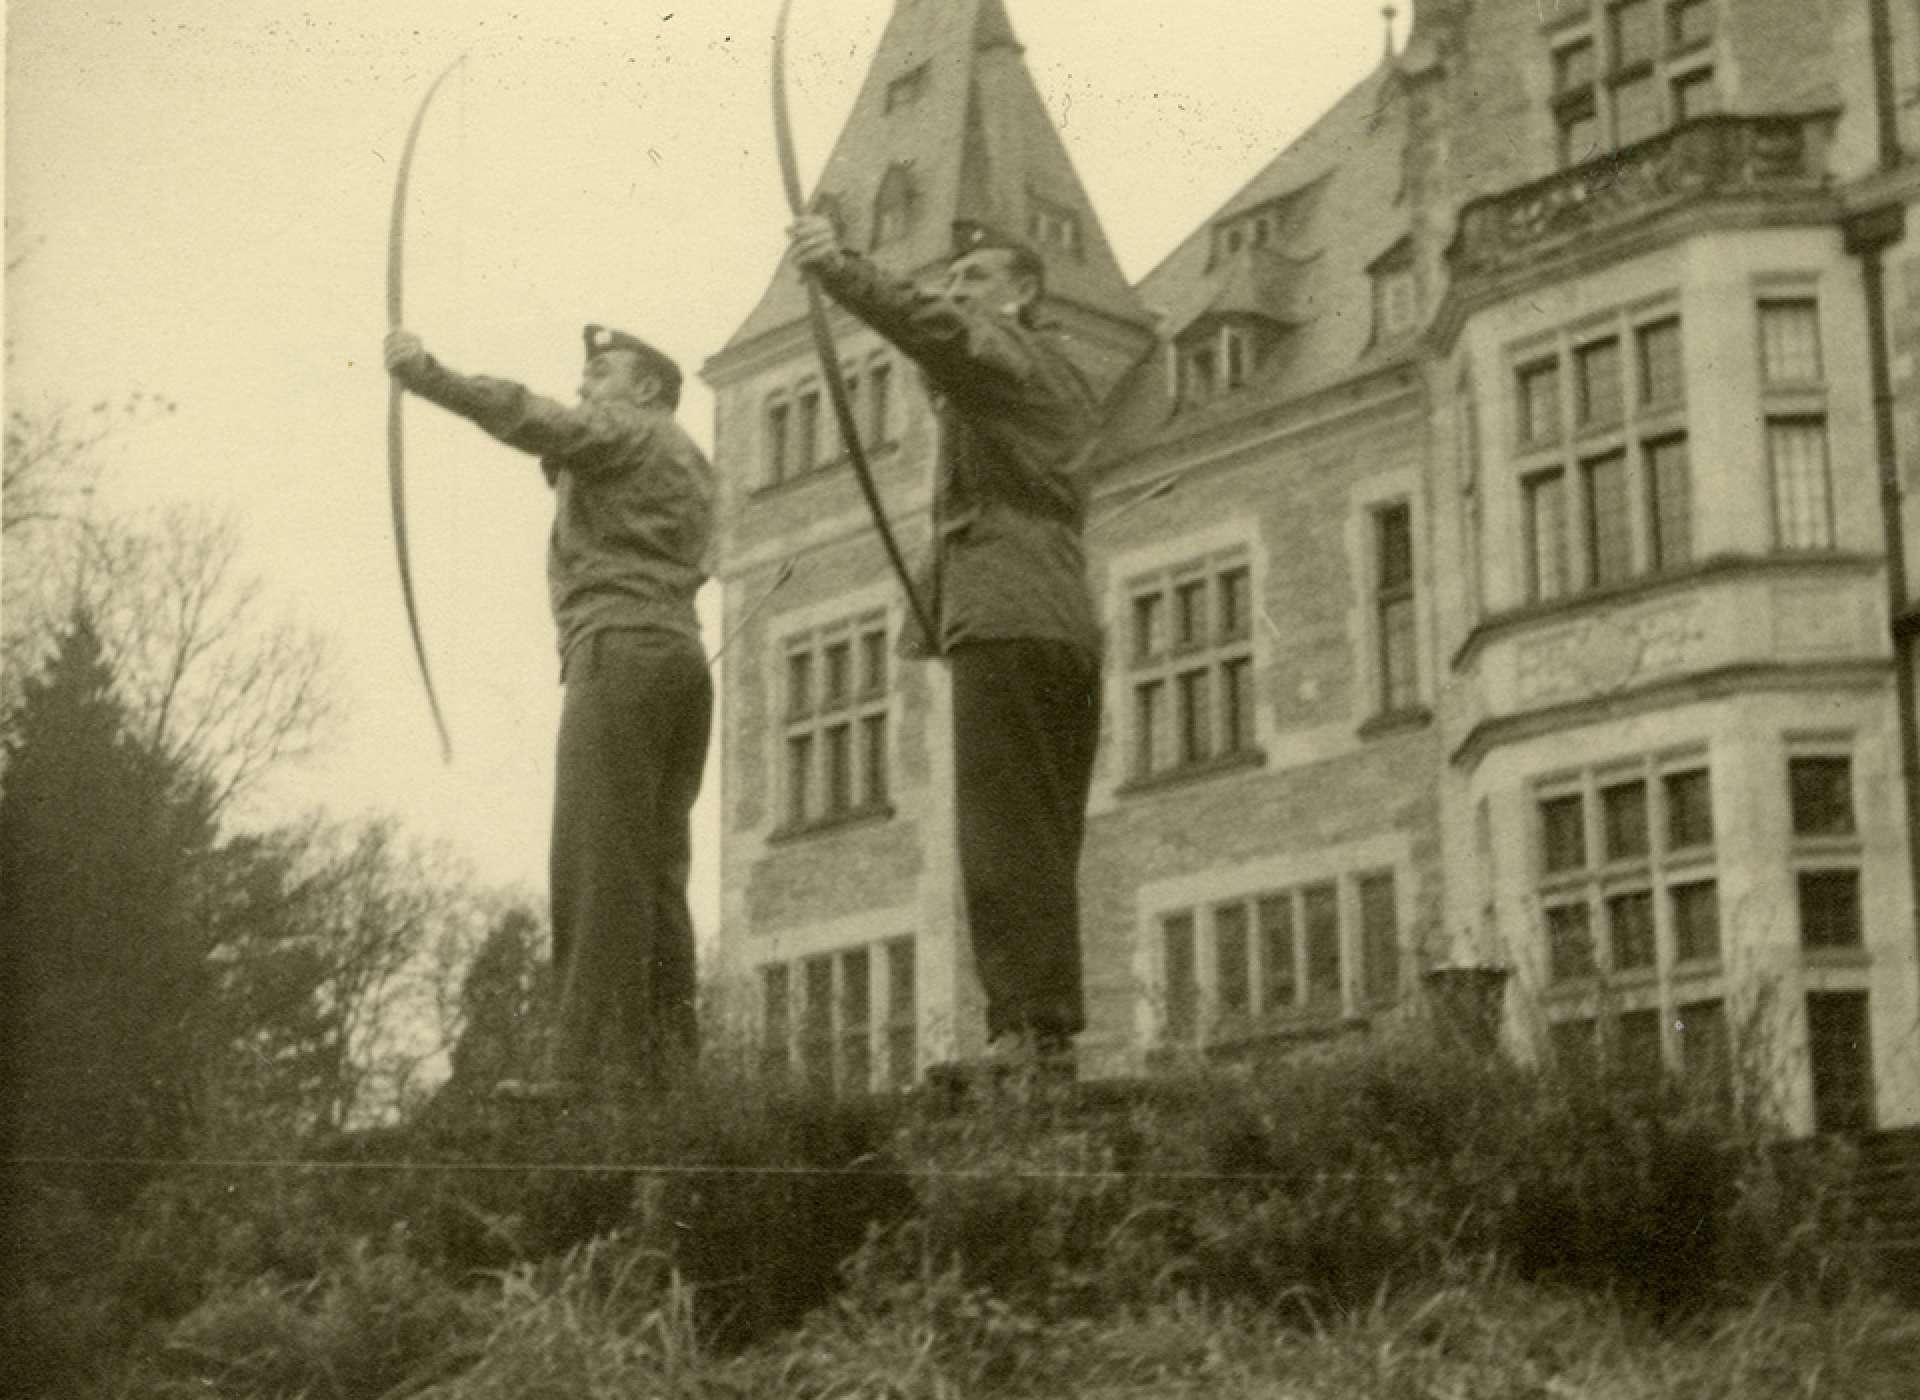 US Army Officers practice archery on the ground of Kronberg Castle